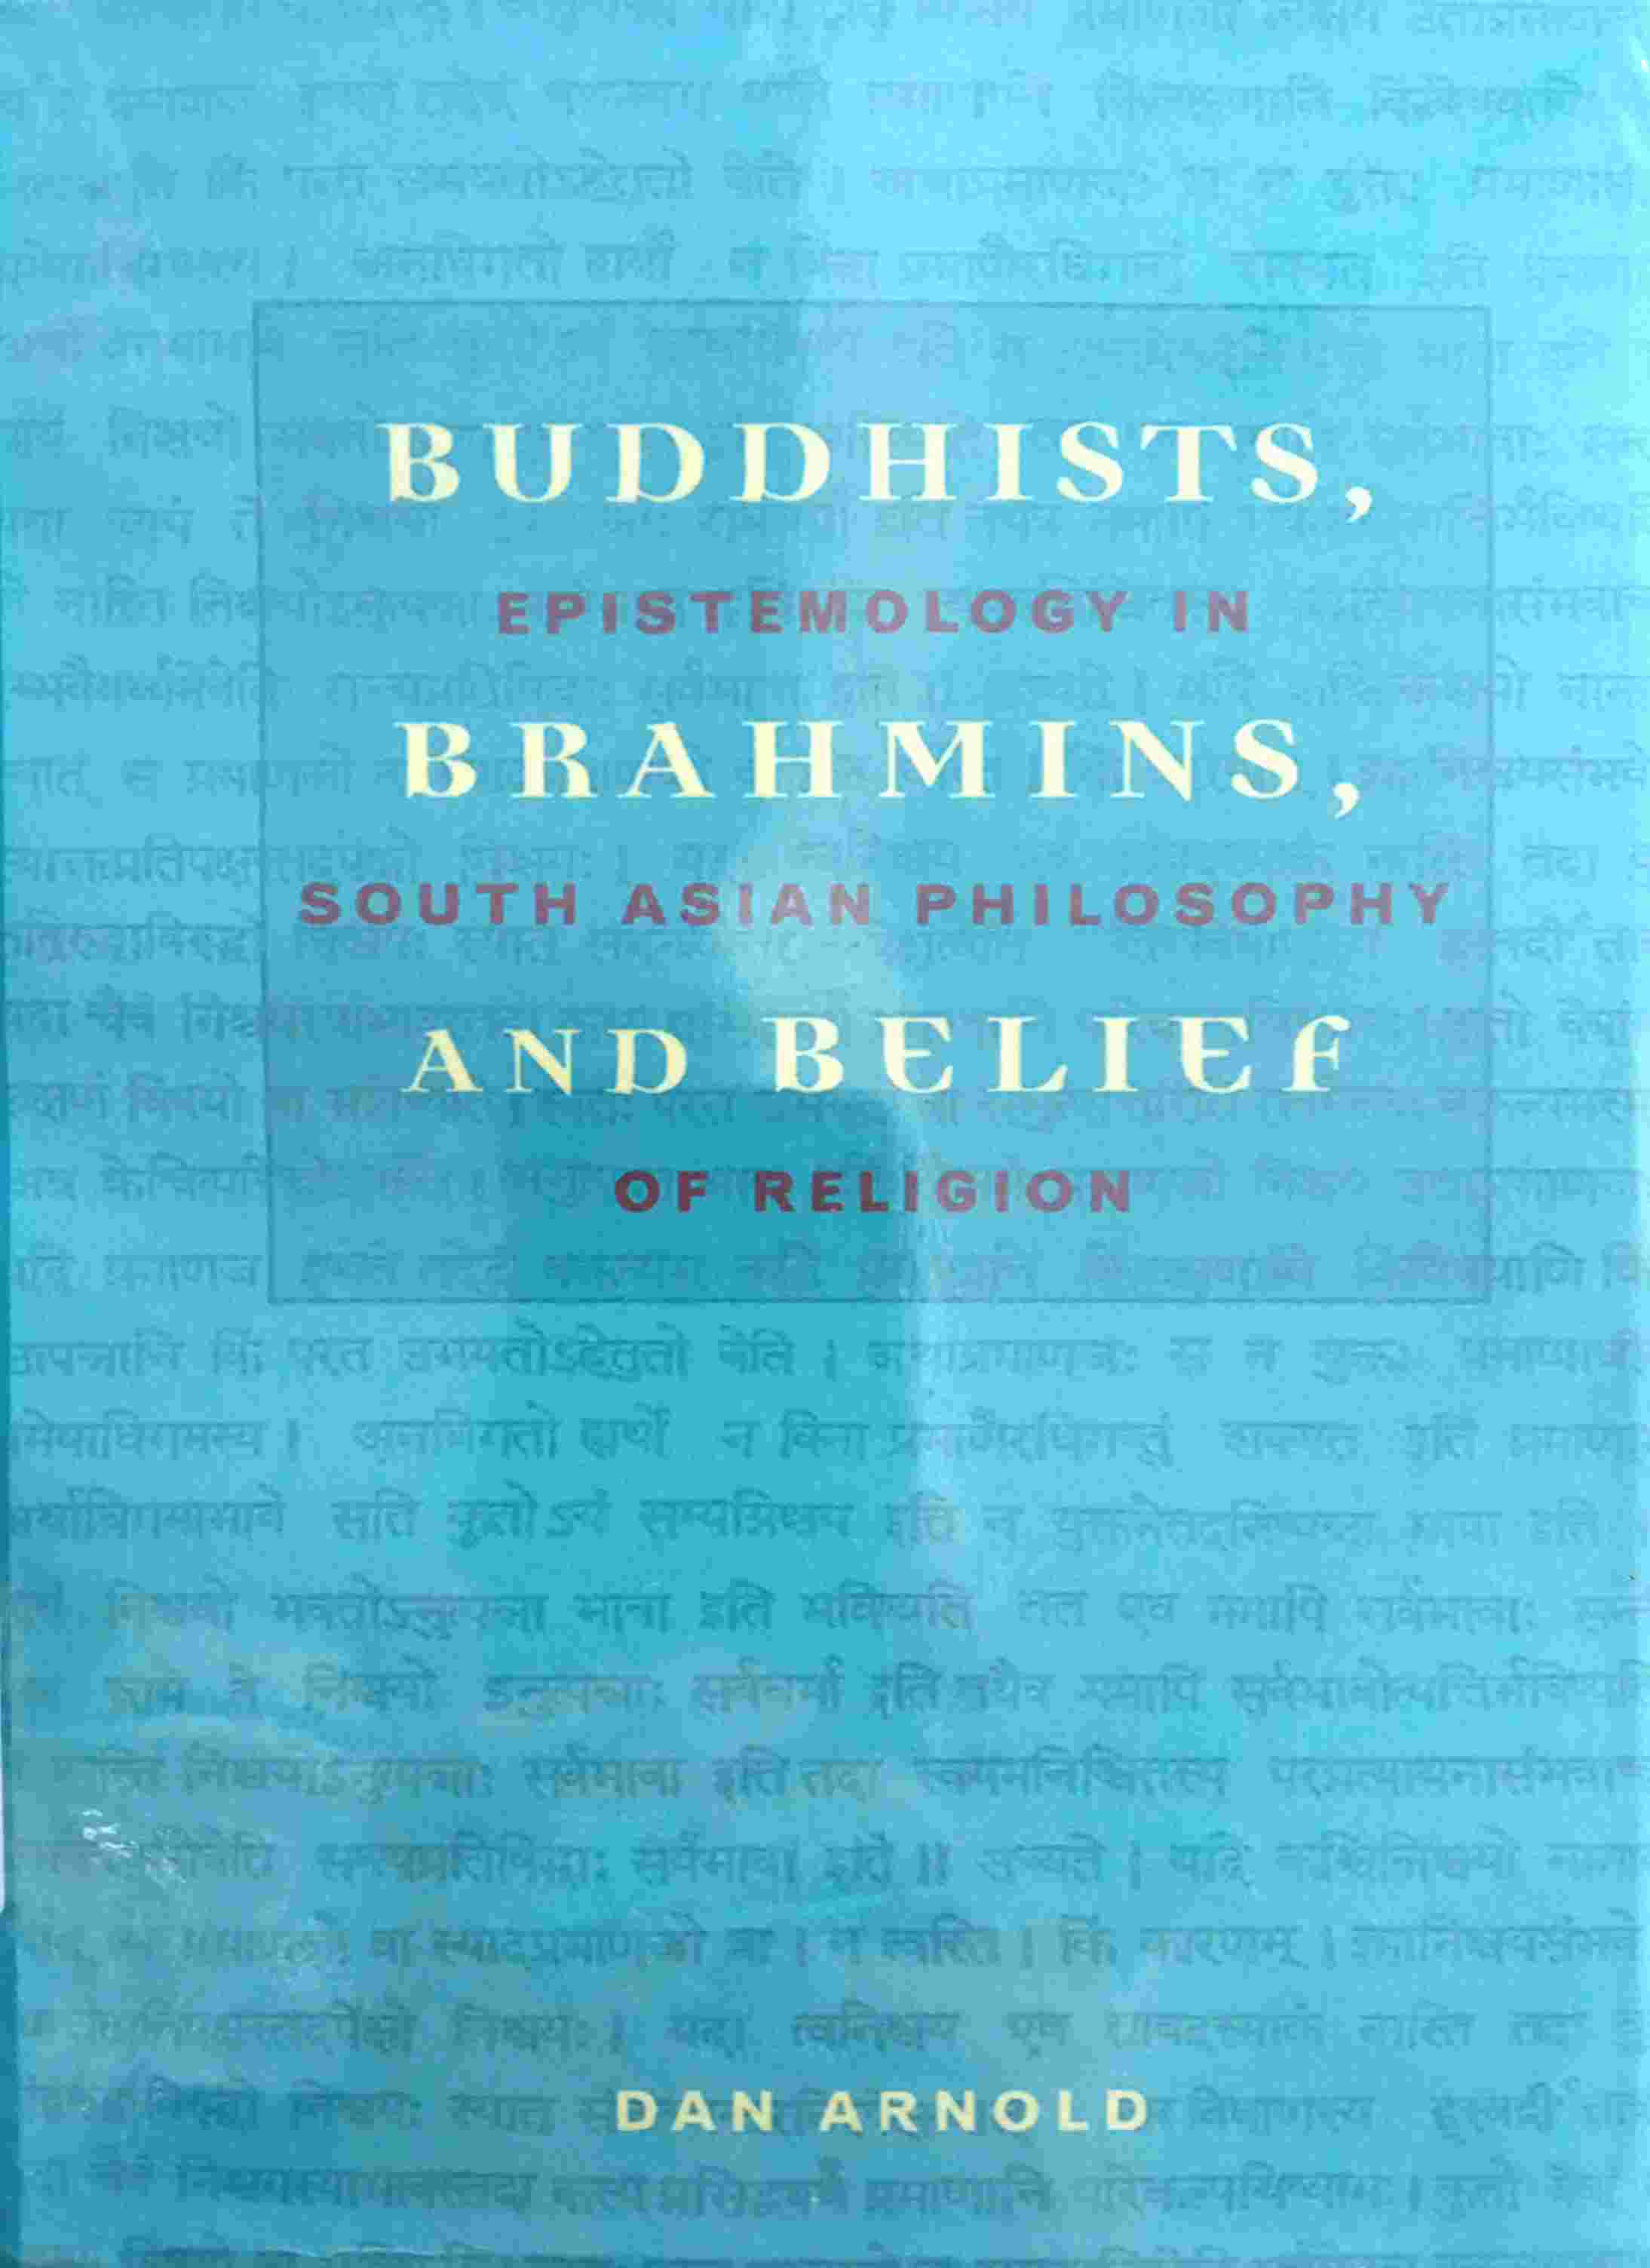 BUDDHISTS, BRAHMINS, AND BELIEF: EPISTEMOLOGY IN SOUTH ASIAN PHILOSOPHY OF RELIGION